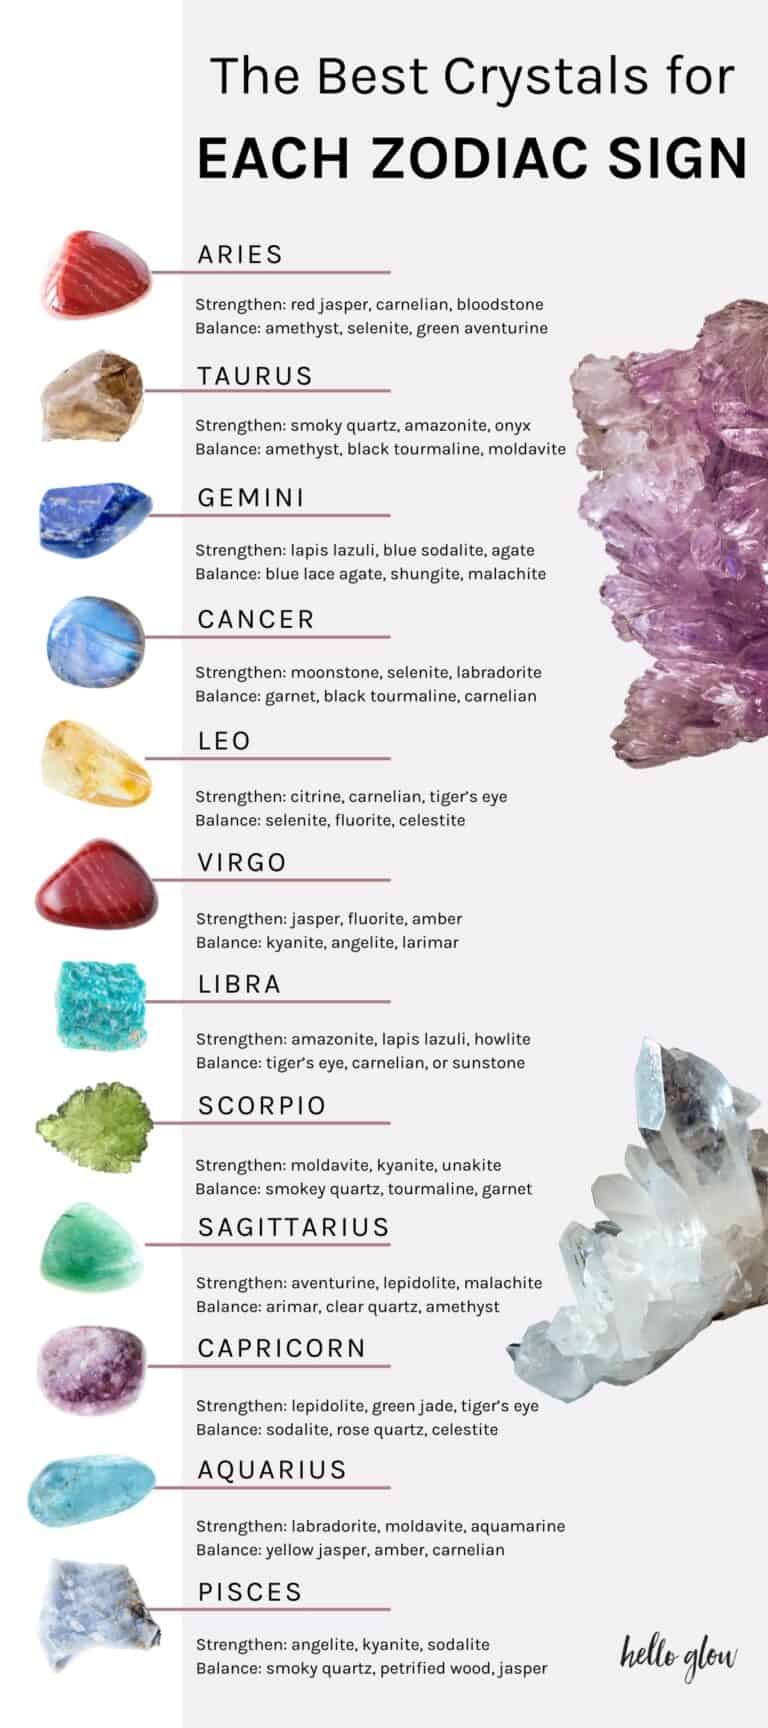 The Best Crystals for Each Zodiac Sign | Hello Glow